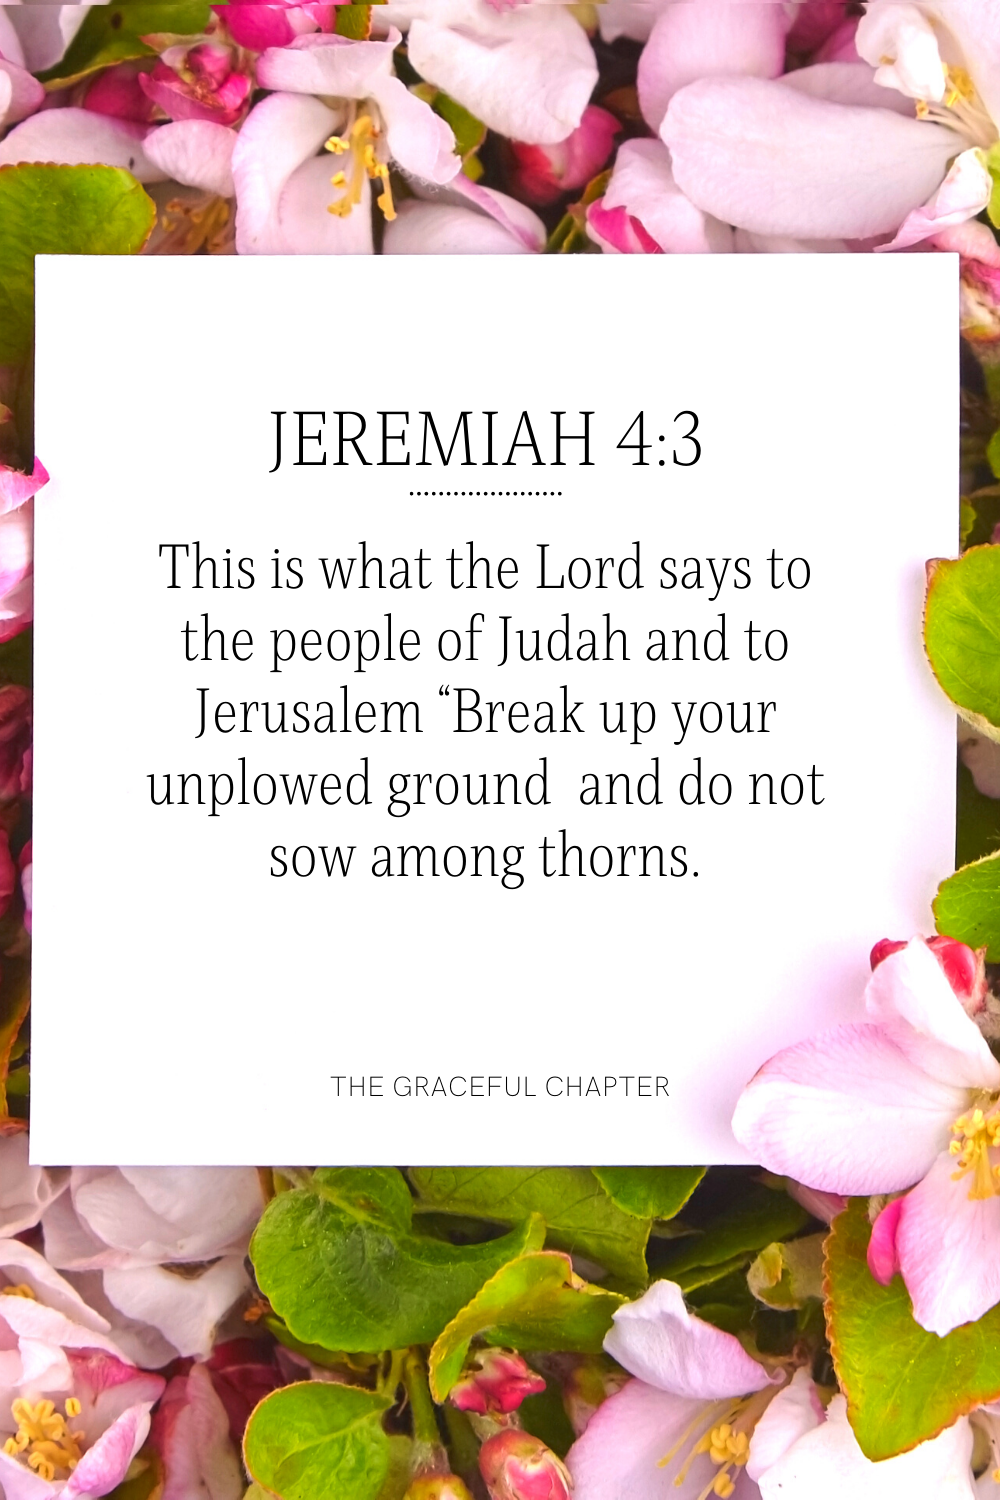 This is what the Lord says to the people of Judah and to Jerusalem “Break up your unplowed ground   and do not sow among thorns. Jeremiah 4:3